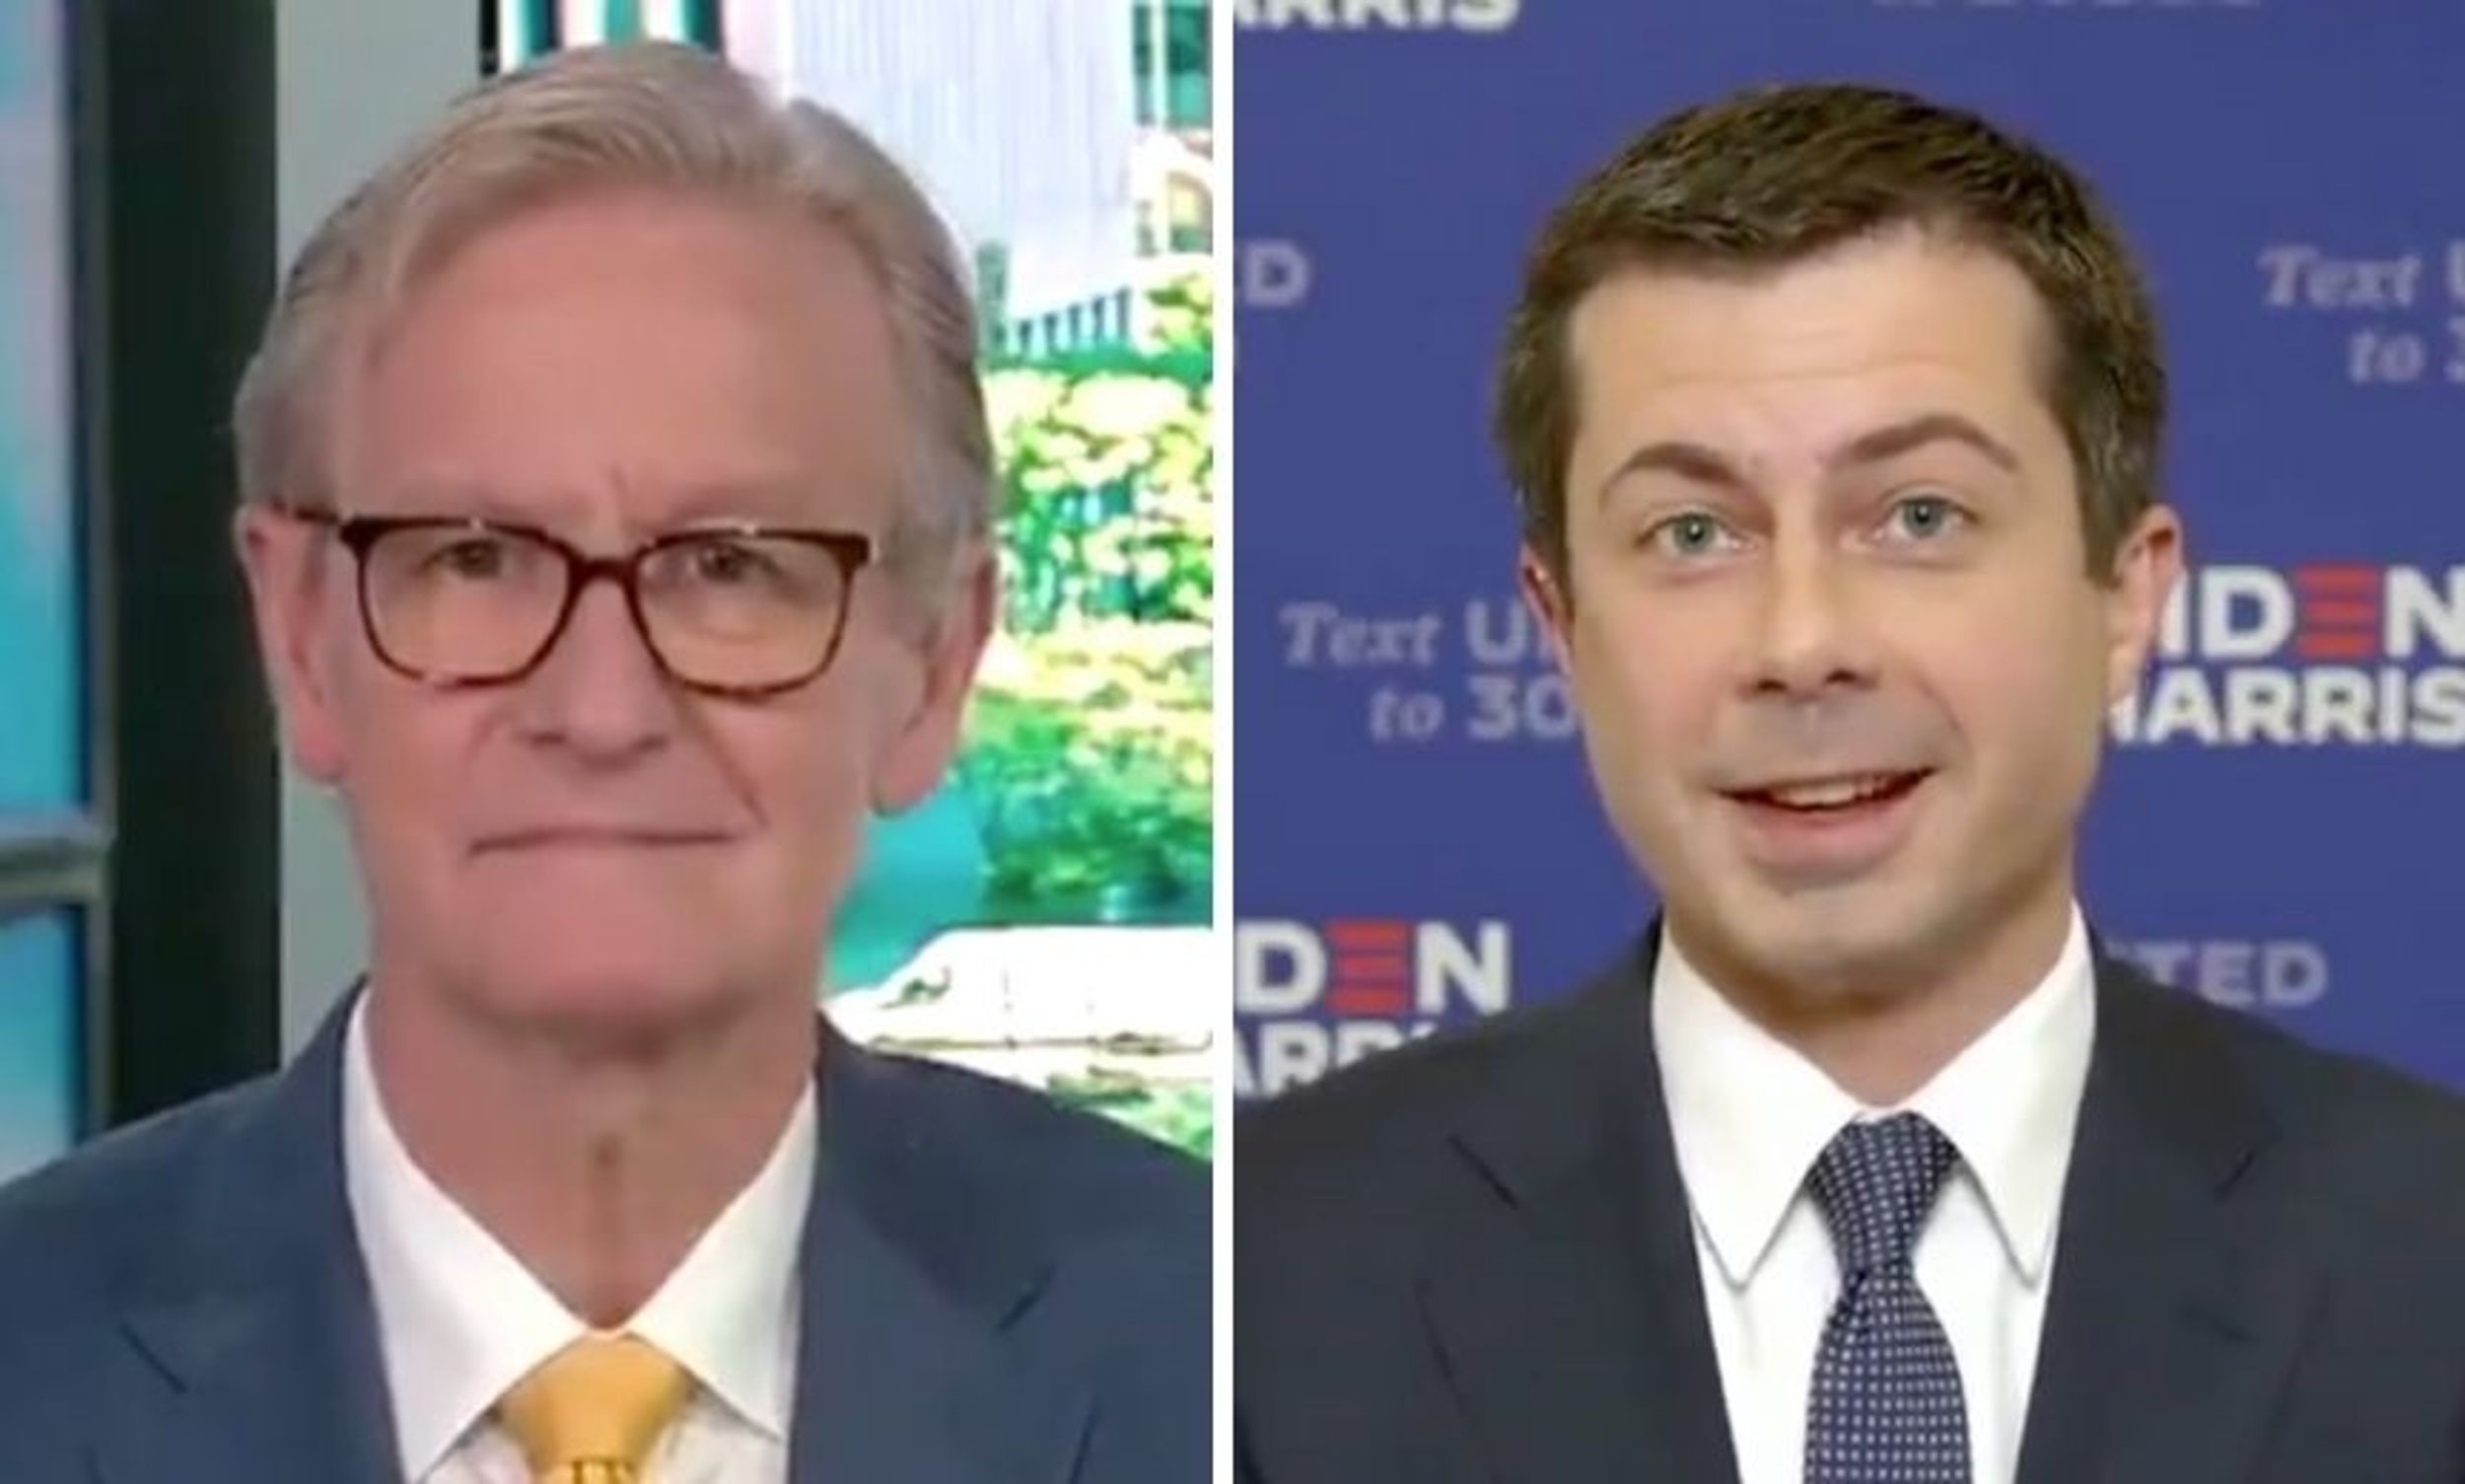 Mayor Pete Went on Fox News and Hit Trump Where It Hurts Over His Refusal to Participate in Virtual Debate